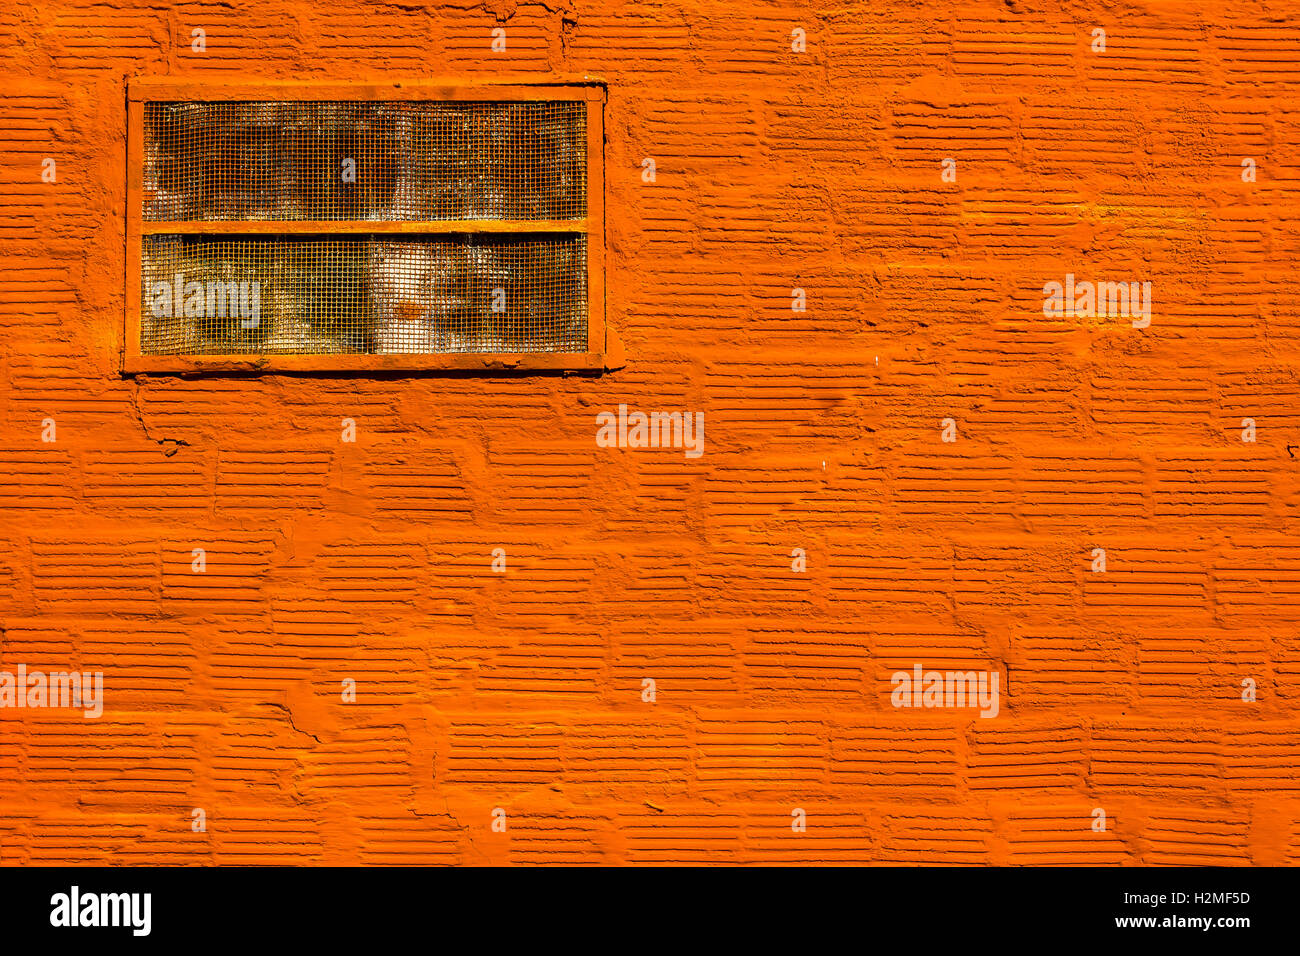 Orange Painted Brick Wall for Background Stock Photo